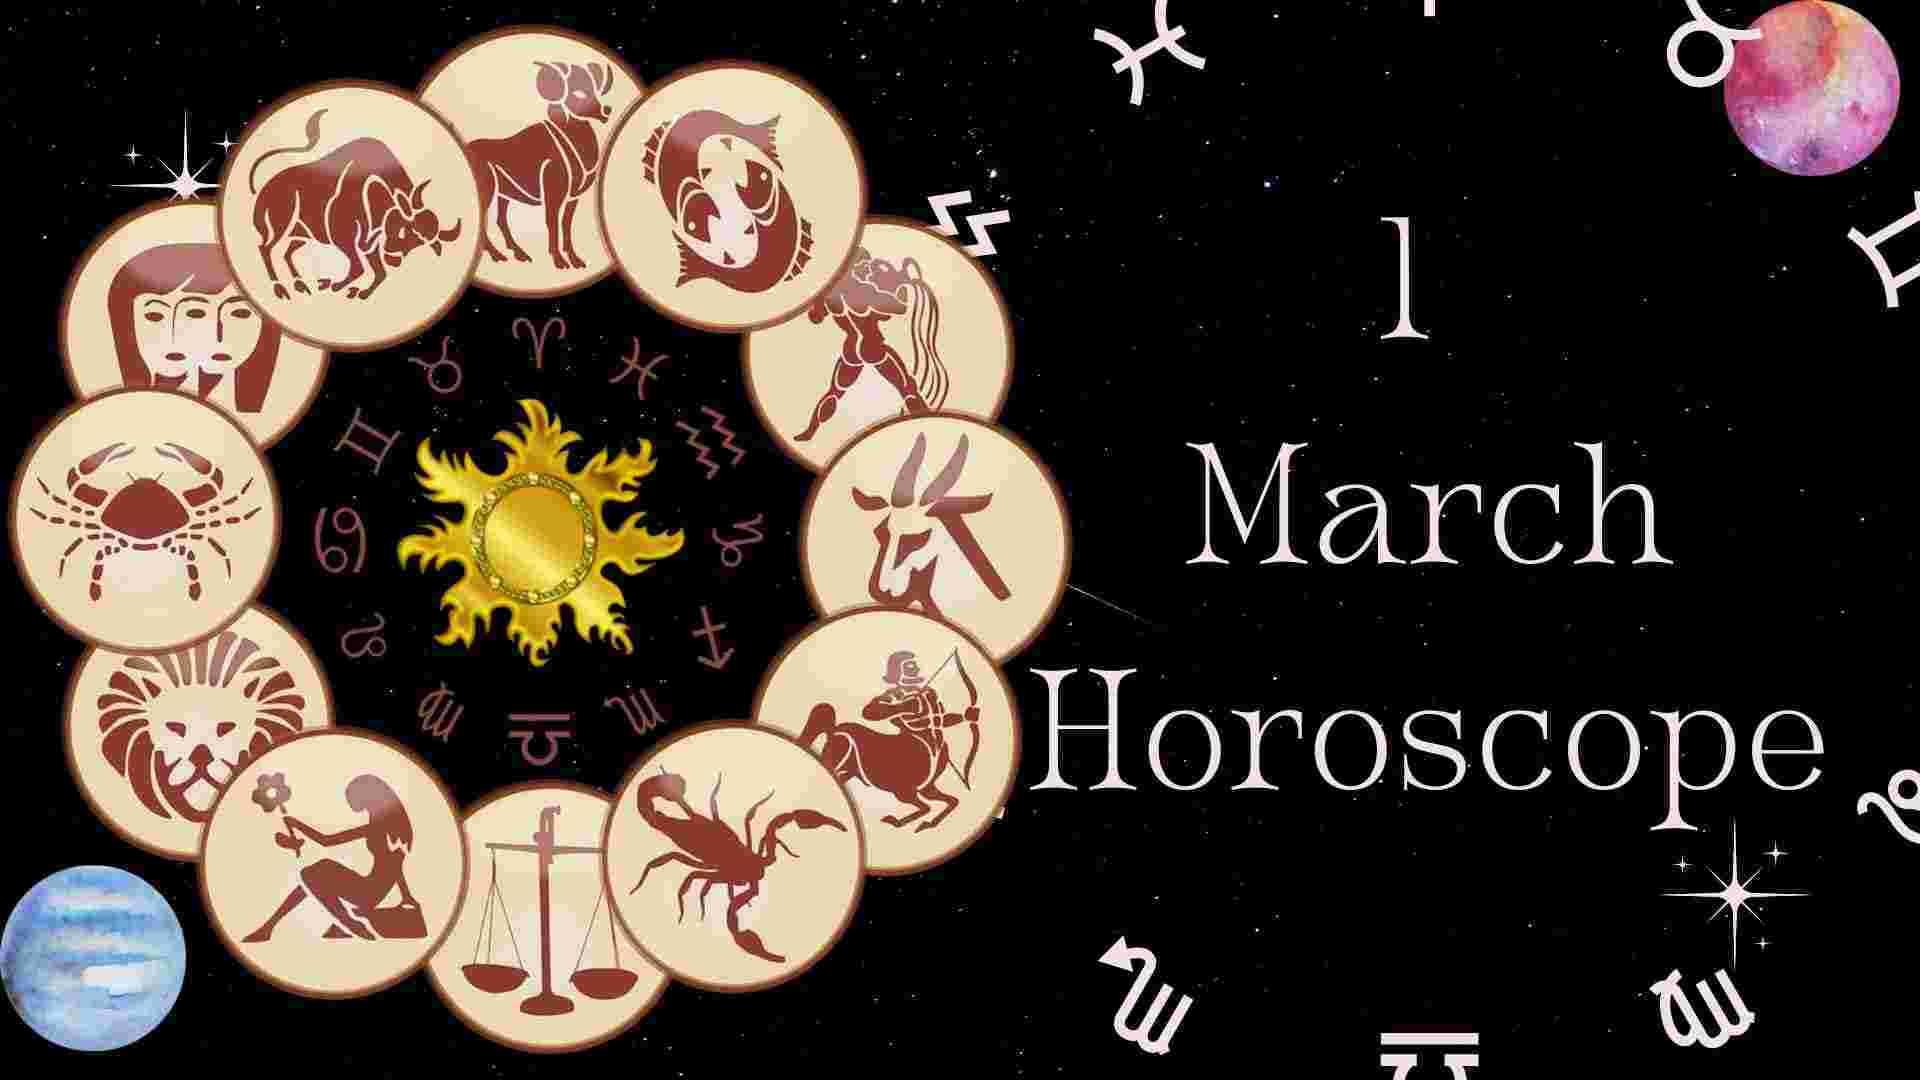 March 1, 2023, in Kal ka Rashifal: These 8 zodiac signs will receive excellent news with Ganesha’s blessing, so take these steps